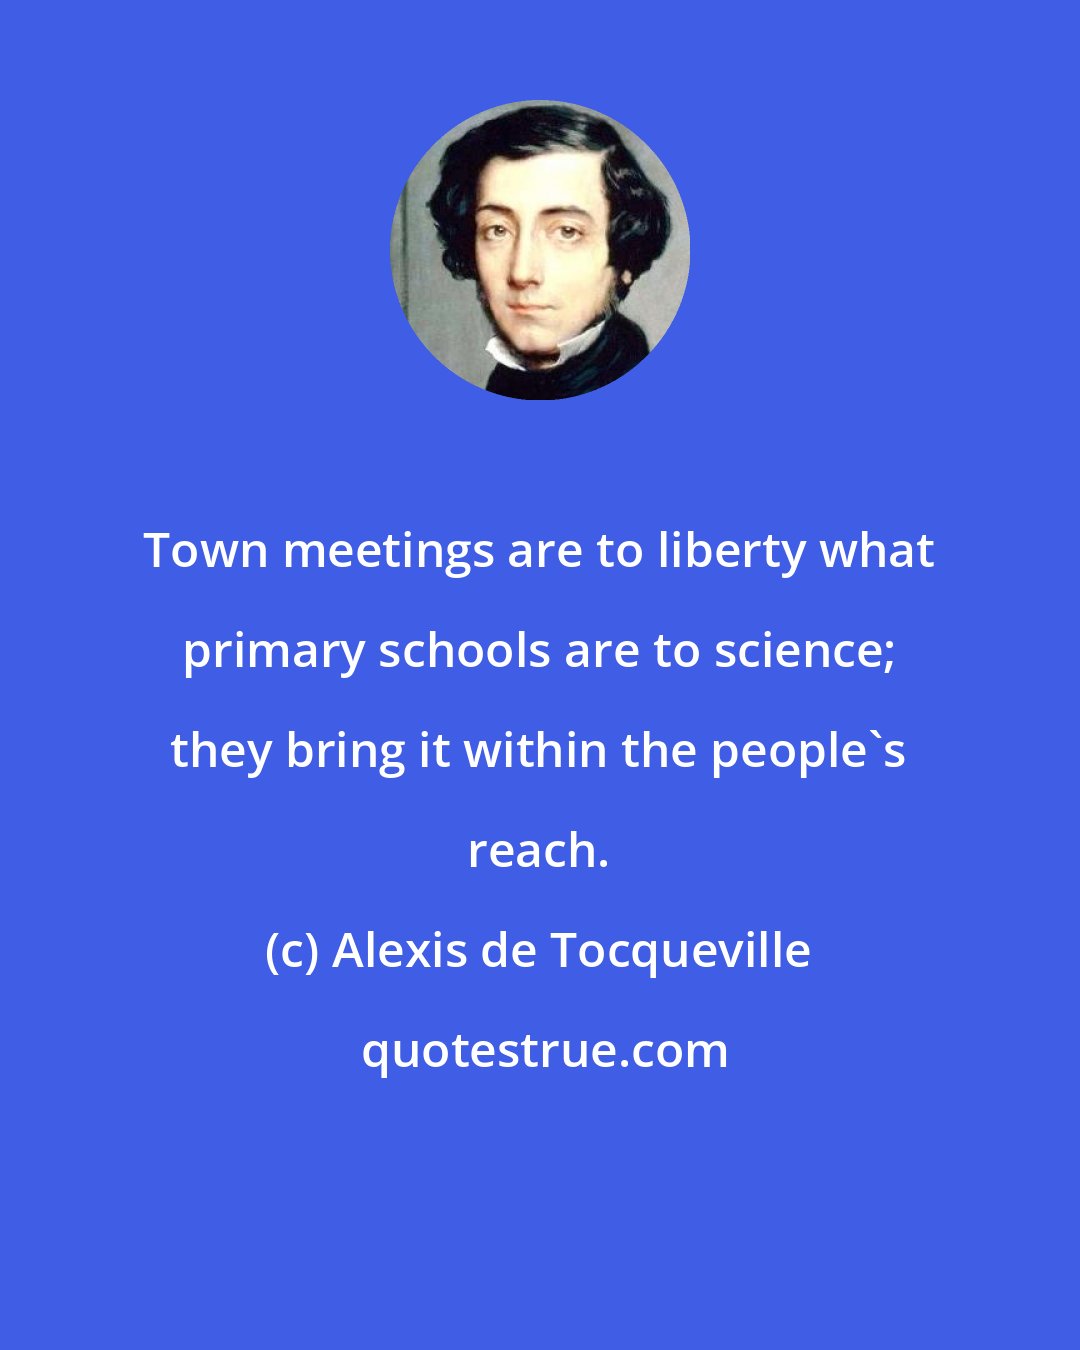 Alexis de Tocqueville: Town meetings are to liberty what primary schools are to science; they bring it within the people's reach.